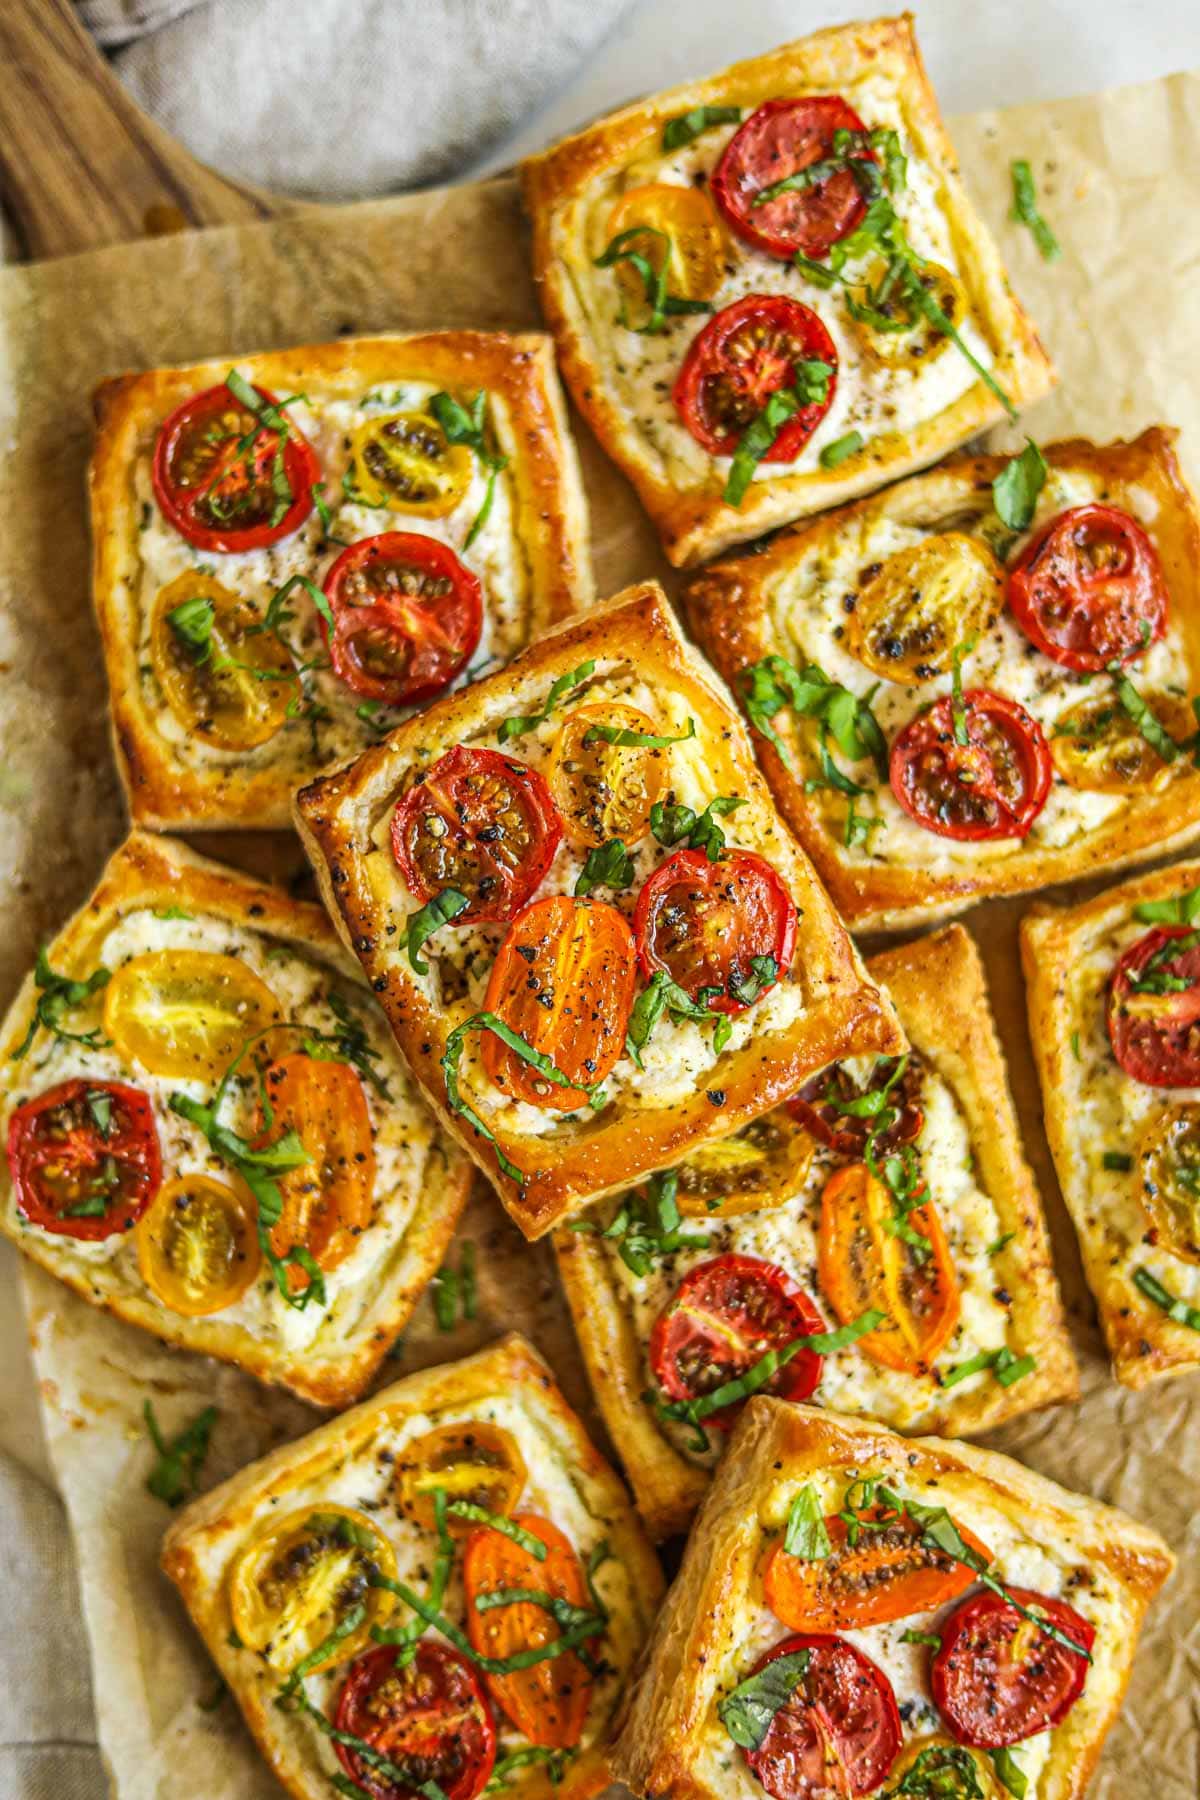 Tomato ricotta tartlets with heirloom tomatoes and fresh basil ribbons on a olive wood serving board.